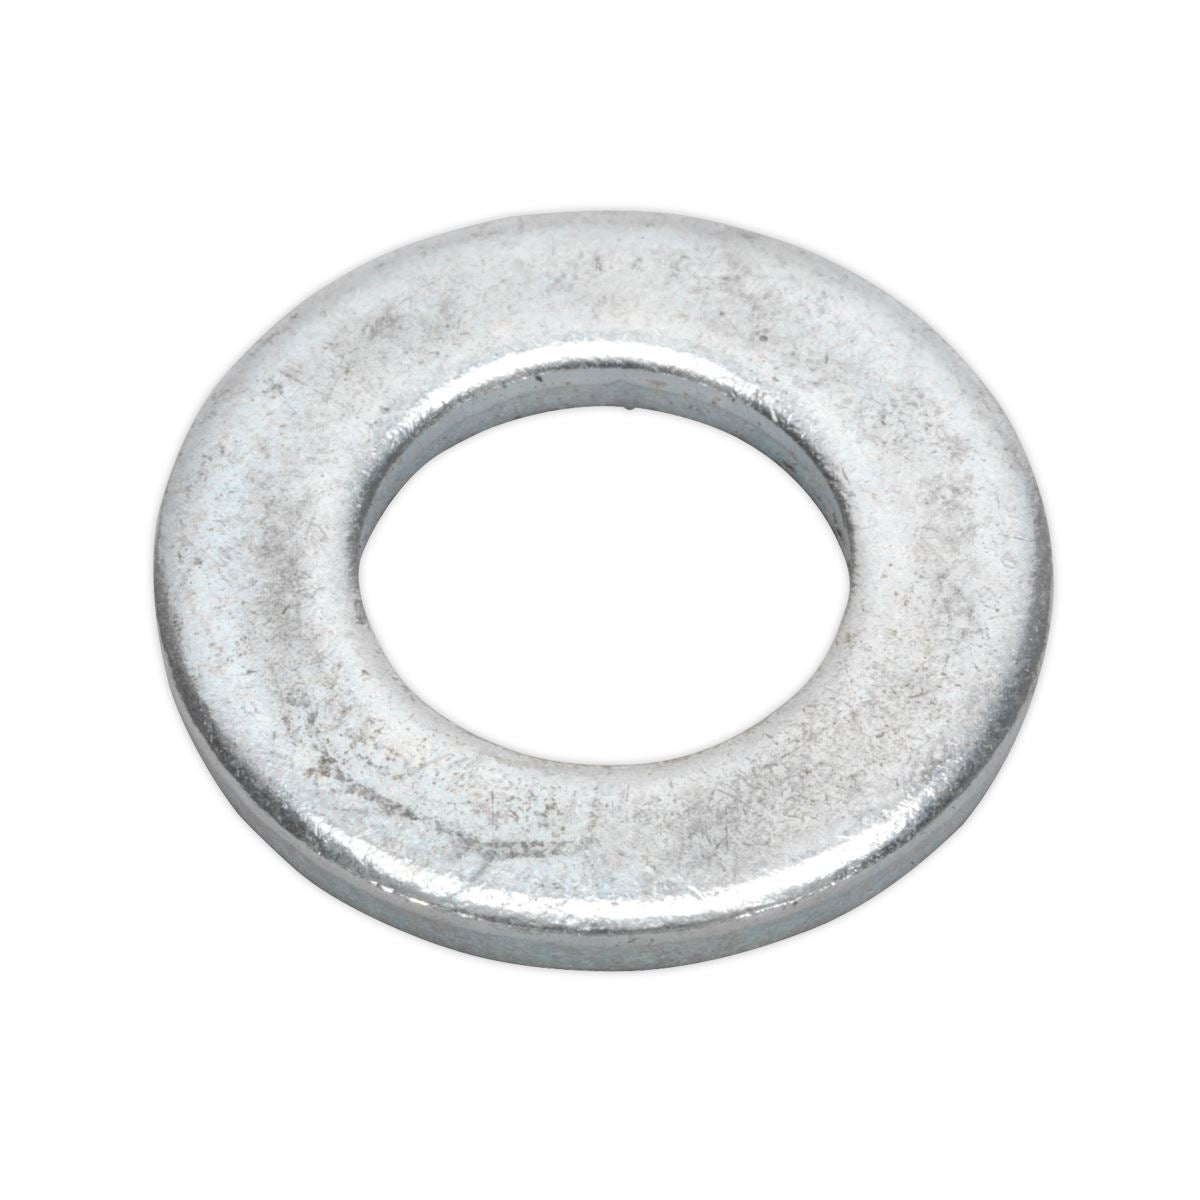 Sealey 100 Pack M12 x 24mm Zinc Flat Washer DIN 125 Form A